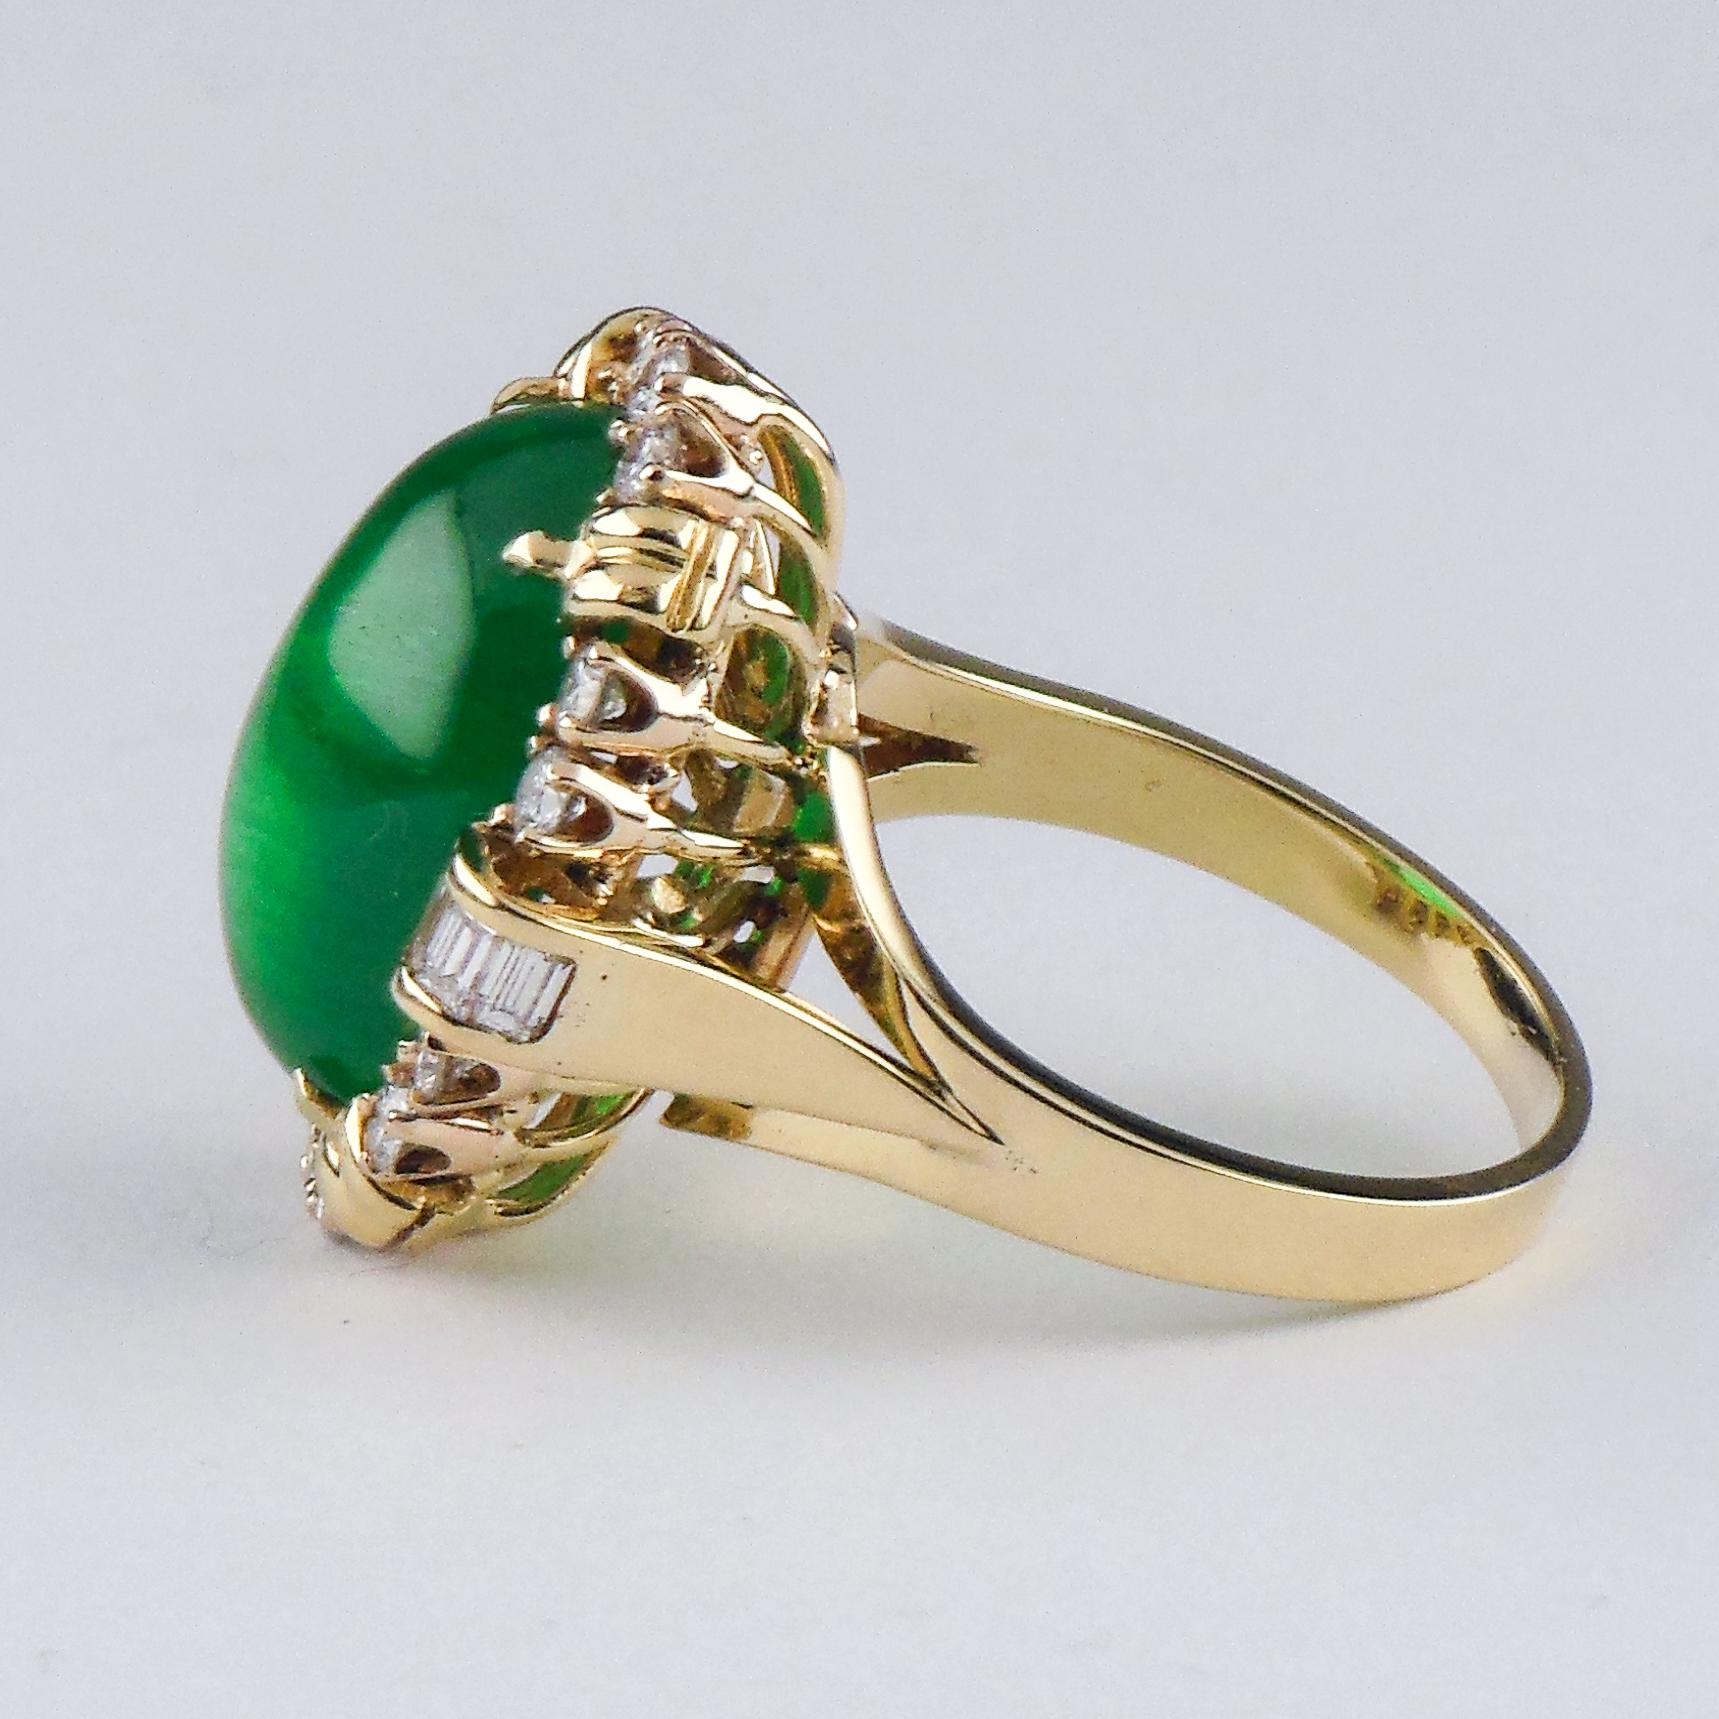 Gorgeous 18k Yellow Gold Solitaire Ring w/ Lively Colombian Emerald Cabochon
Total Emerald Weight: 25.82 ct
Features a Gorgeous Wire Gallery with a prong-set Diamond Bezel & Ornate Prongs
Features a mix of round and emerald-cut diamonds
Total